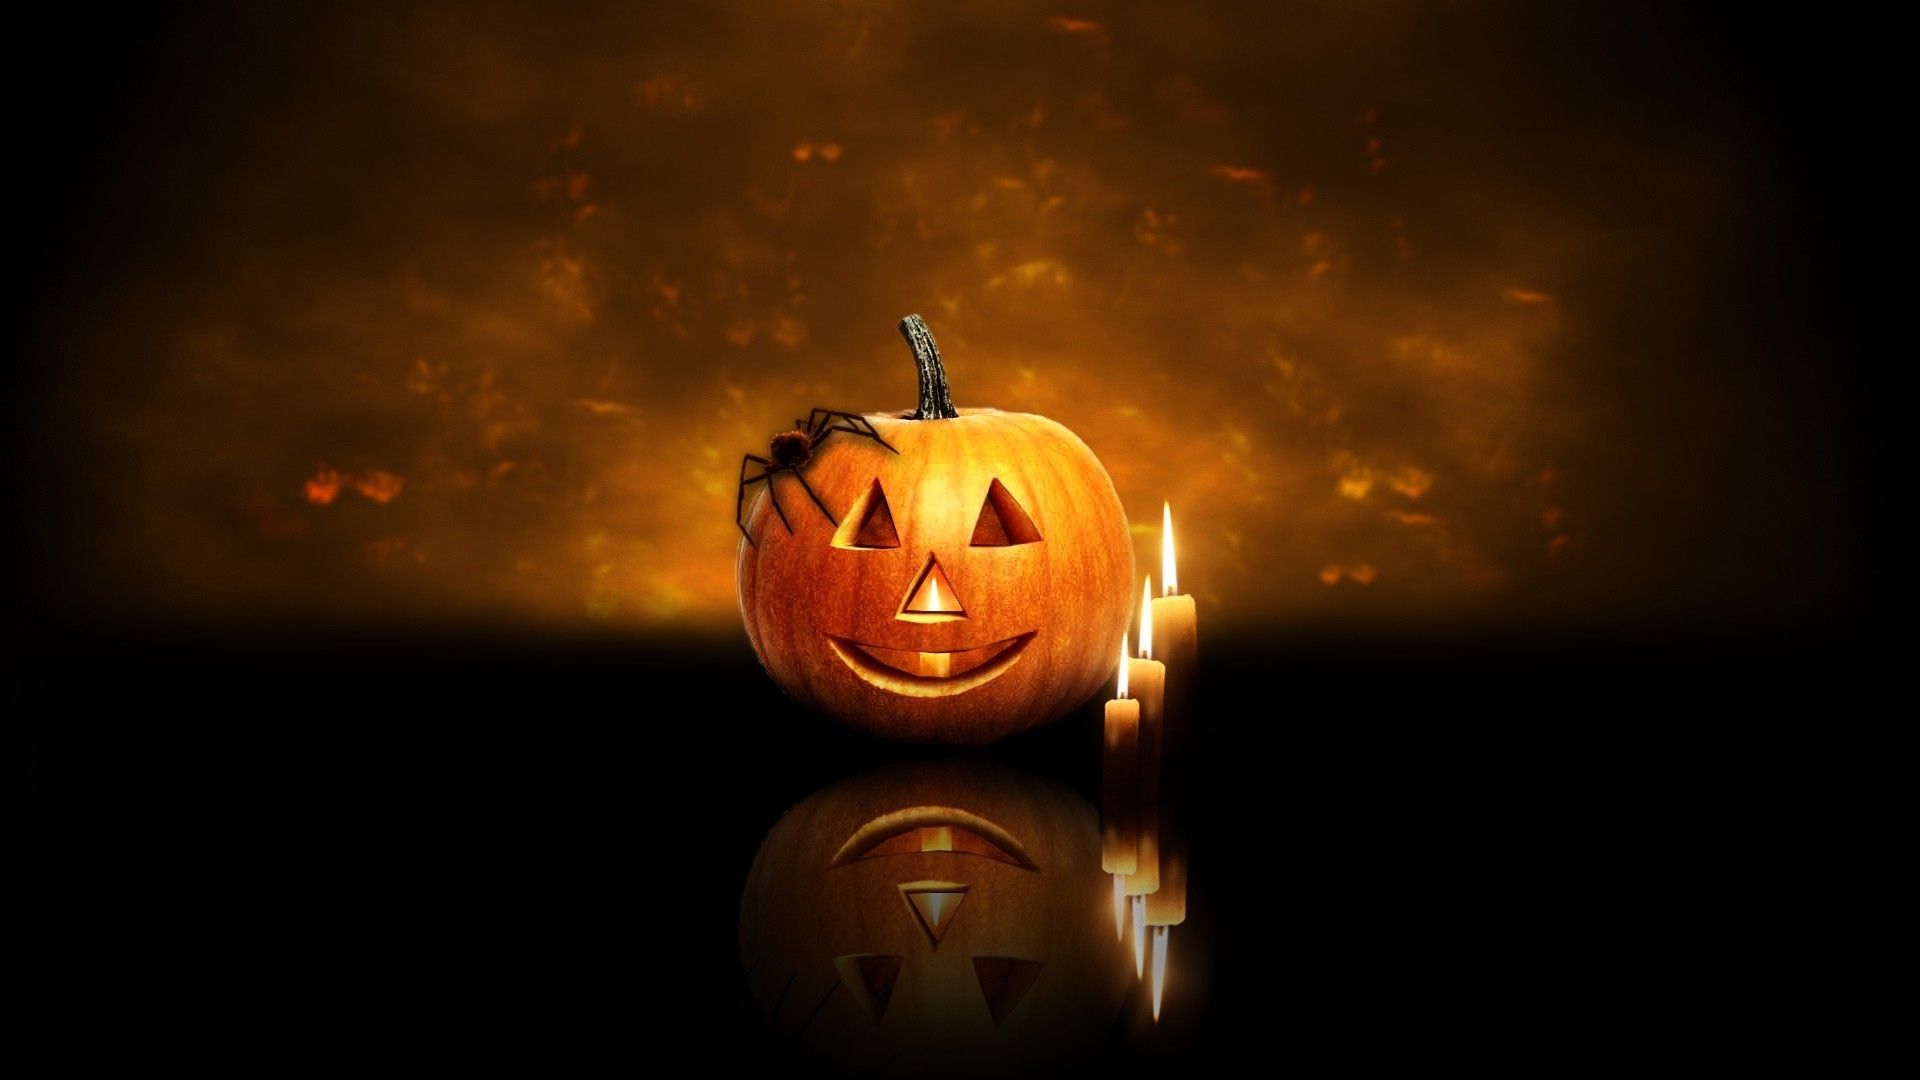 49+] Animated Halloween Wallpapers with Music